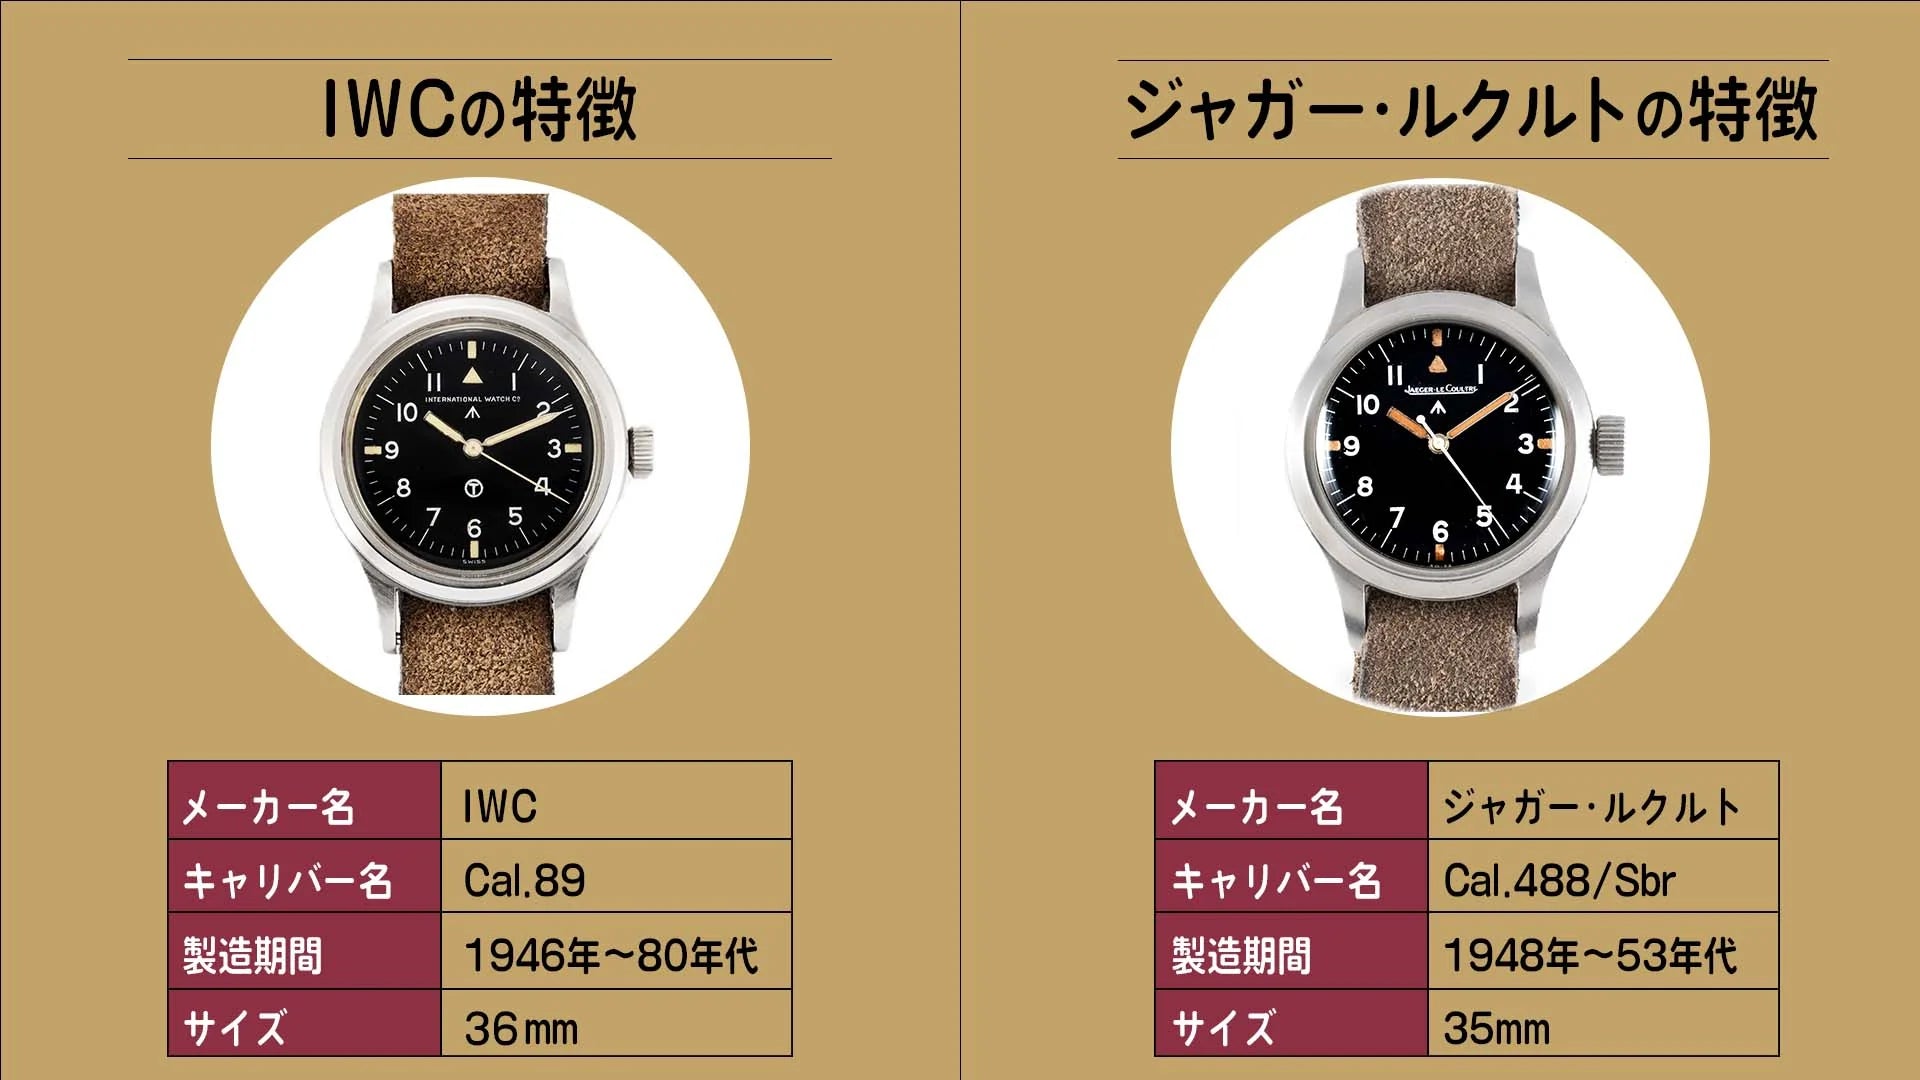 Features of IWC and Jaeger-LeCoultre's Mark 11